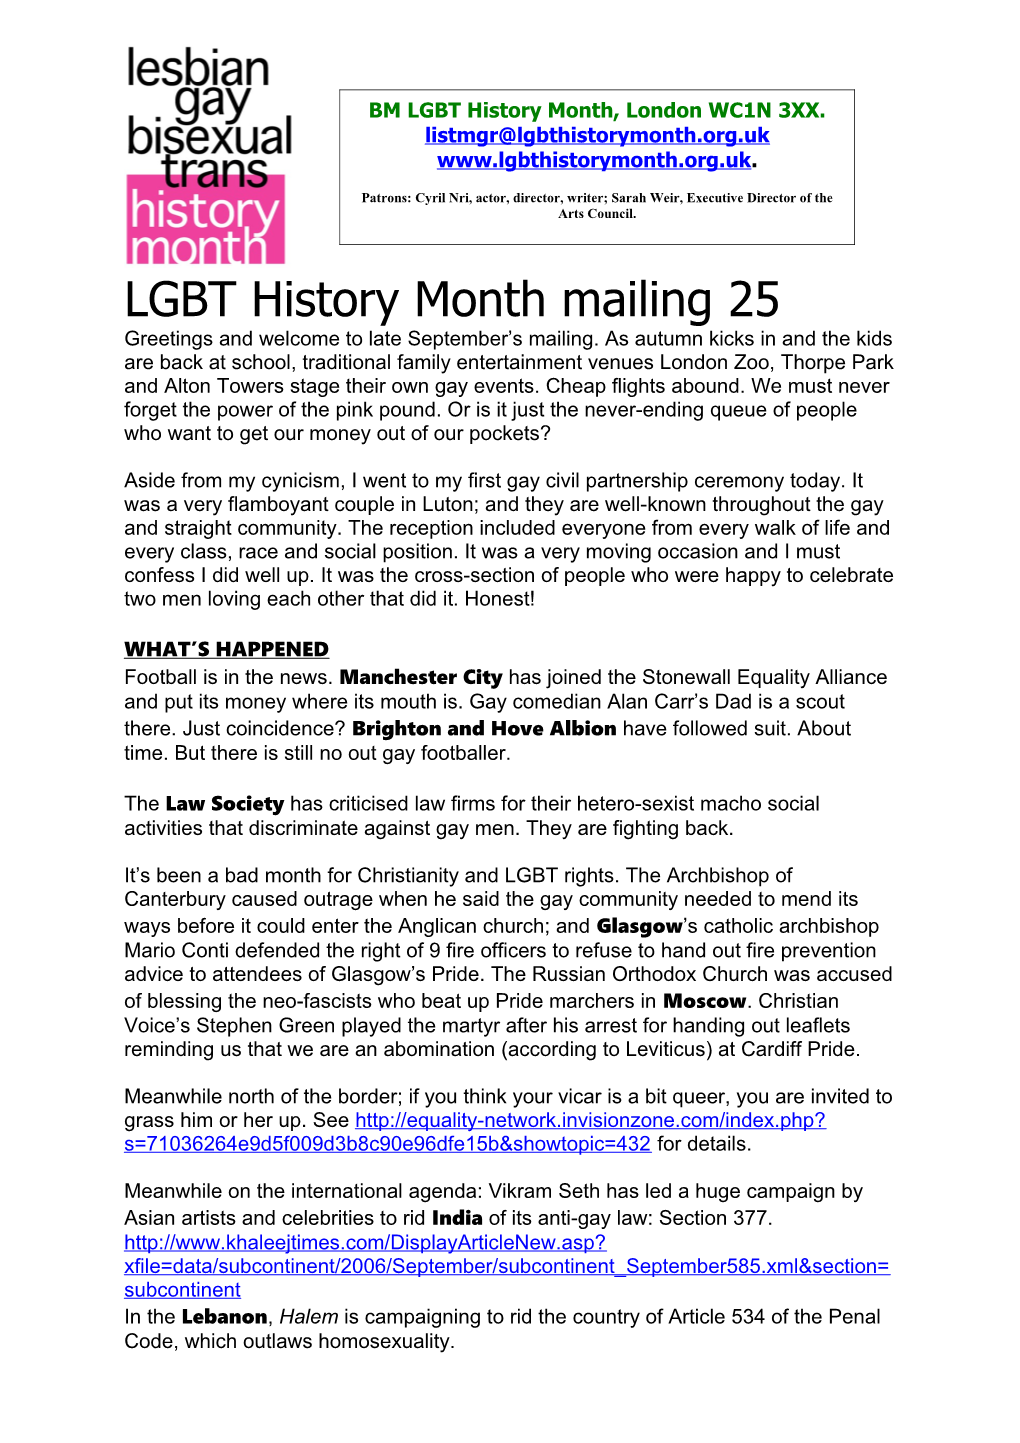 LGBT History Month Mailing 25